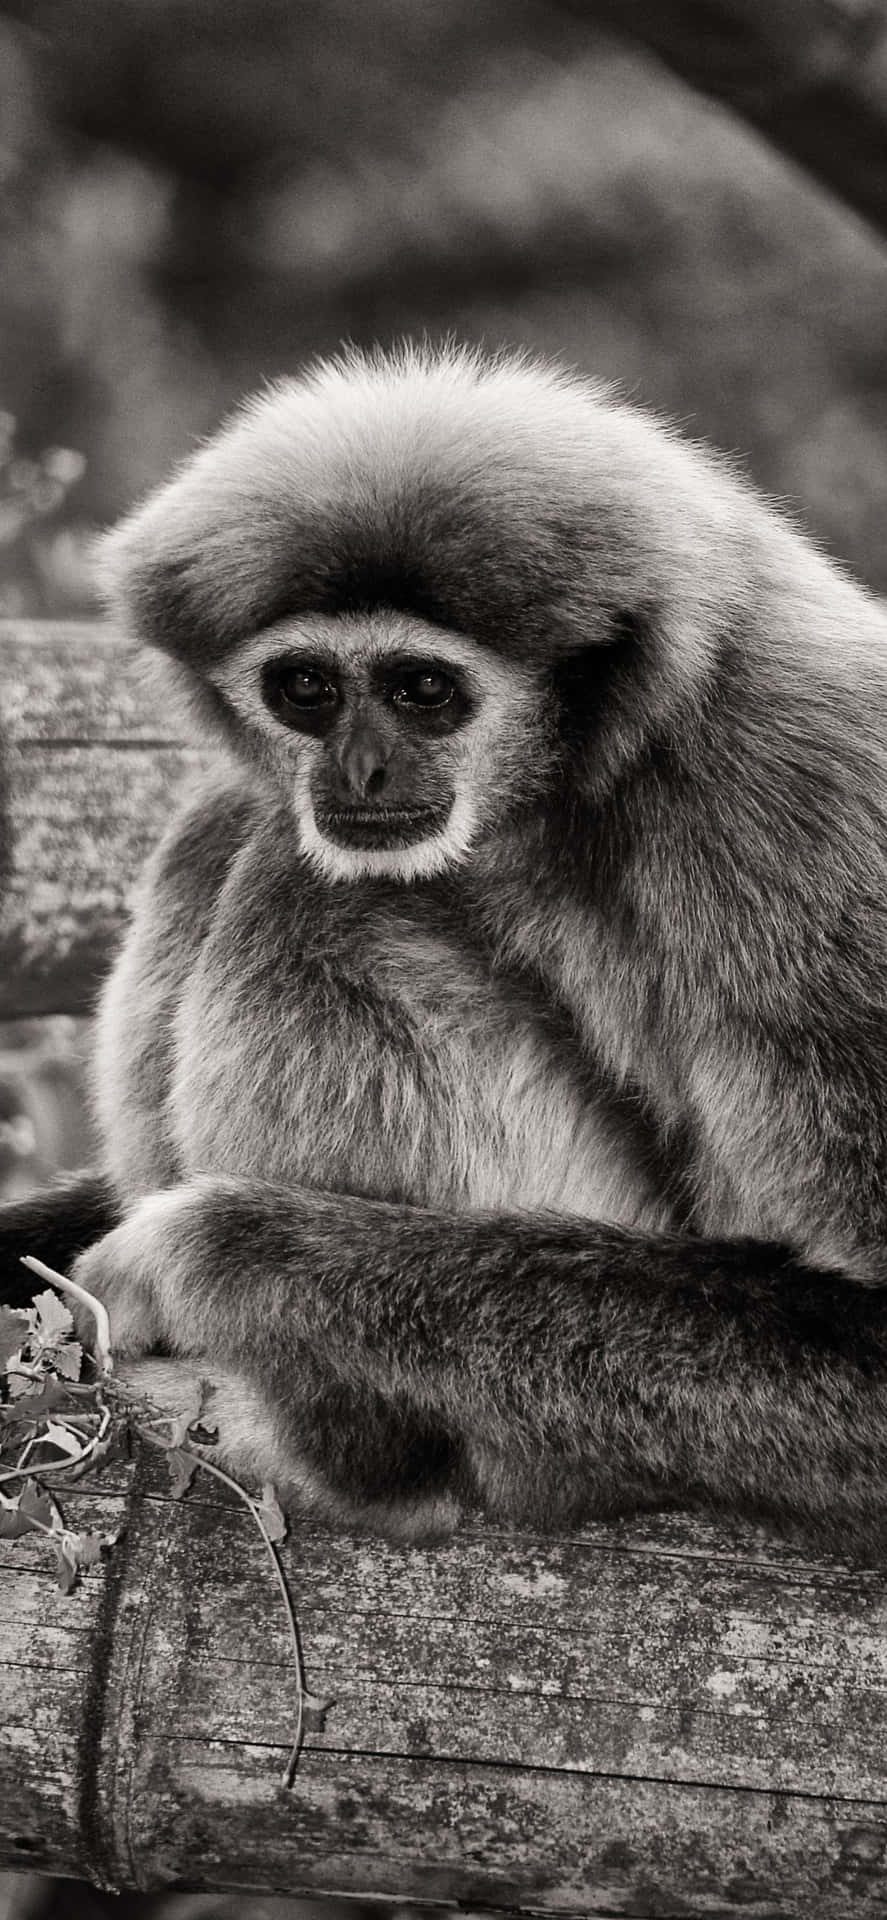 iPhone Xs Max with a bright orange gibbon on the background